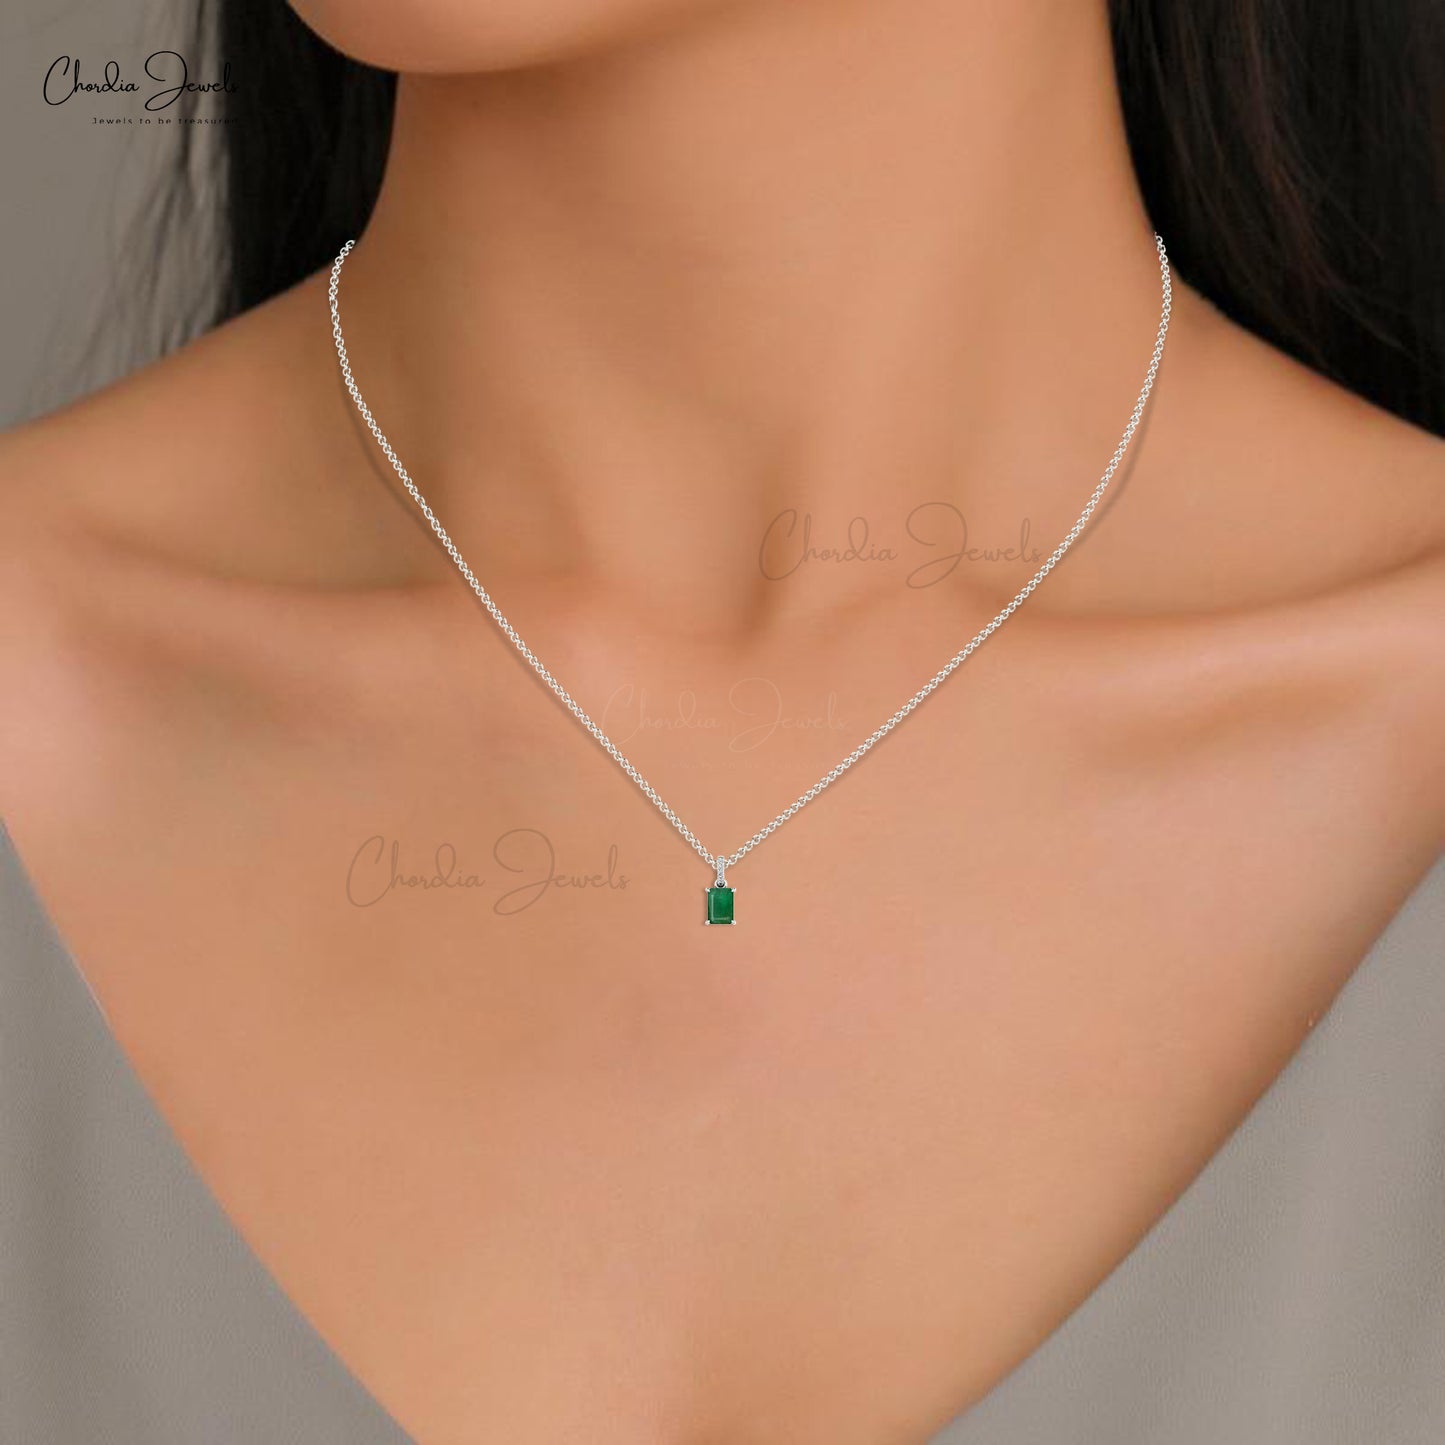 Stunning Dangling Pendant In 14k Real Gold Authentic Emerald & Diamond Studded Pendant